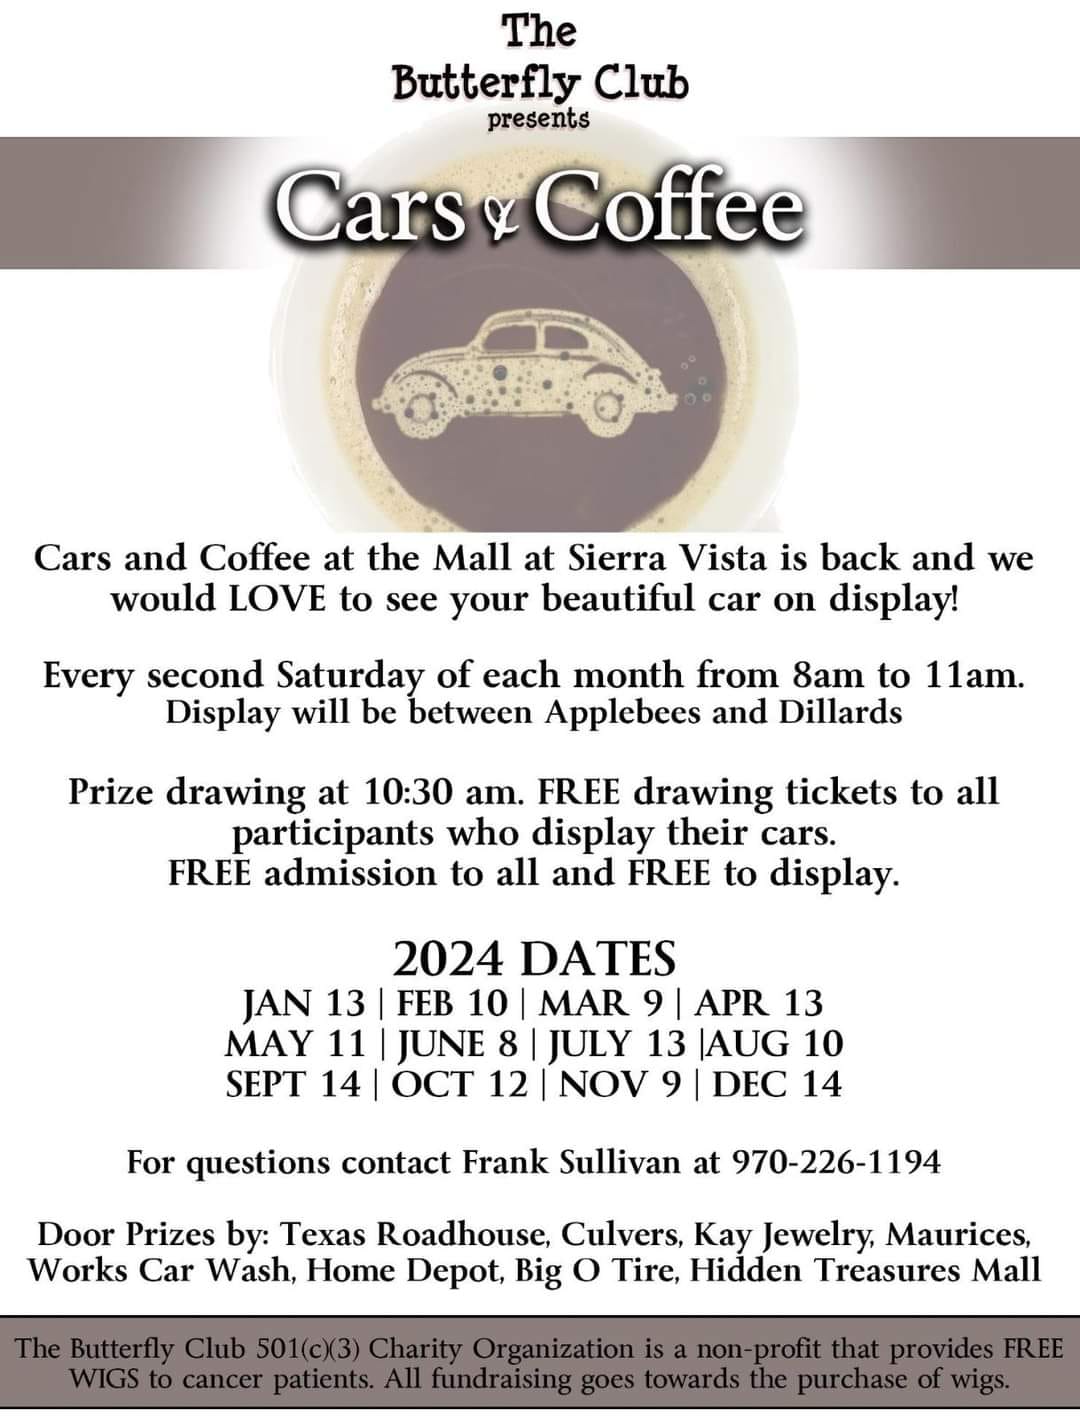 Cars and Coffee at Sierra Vista